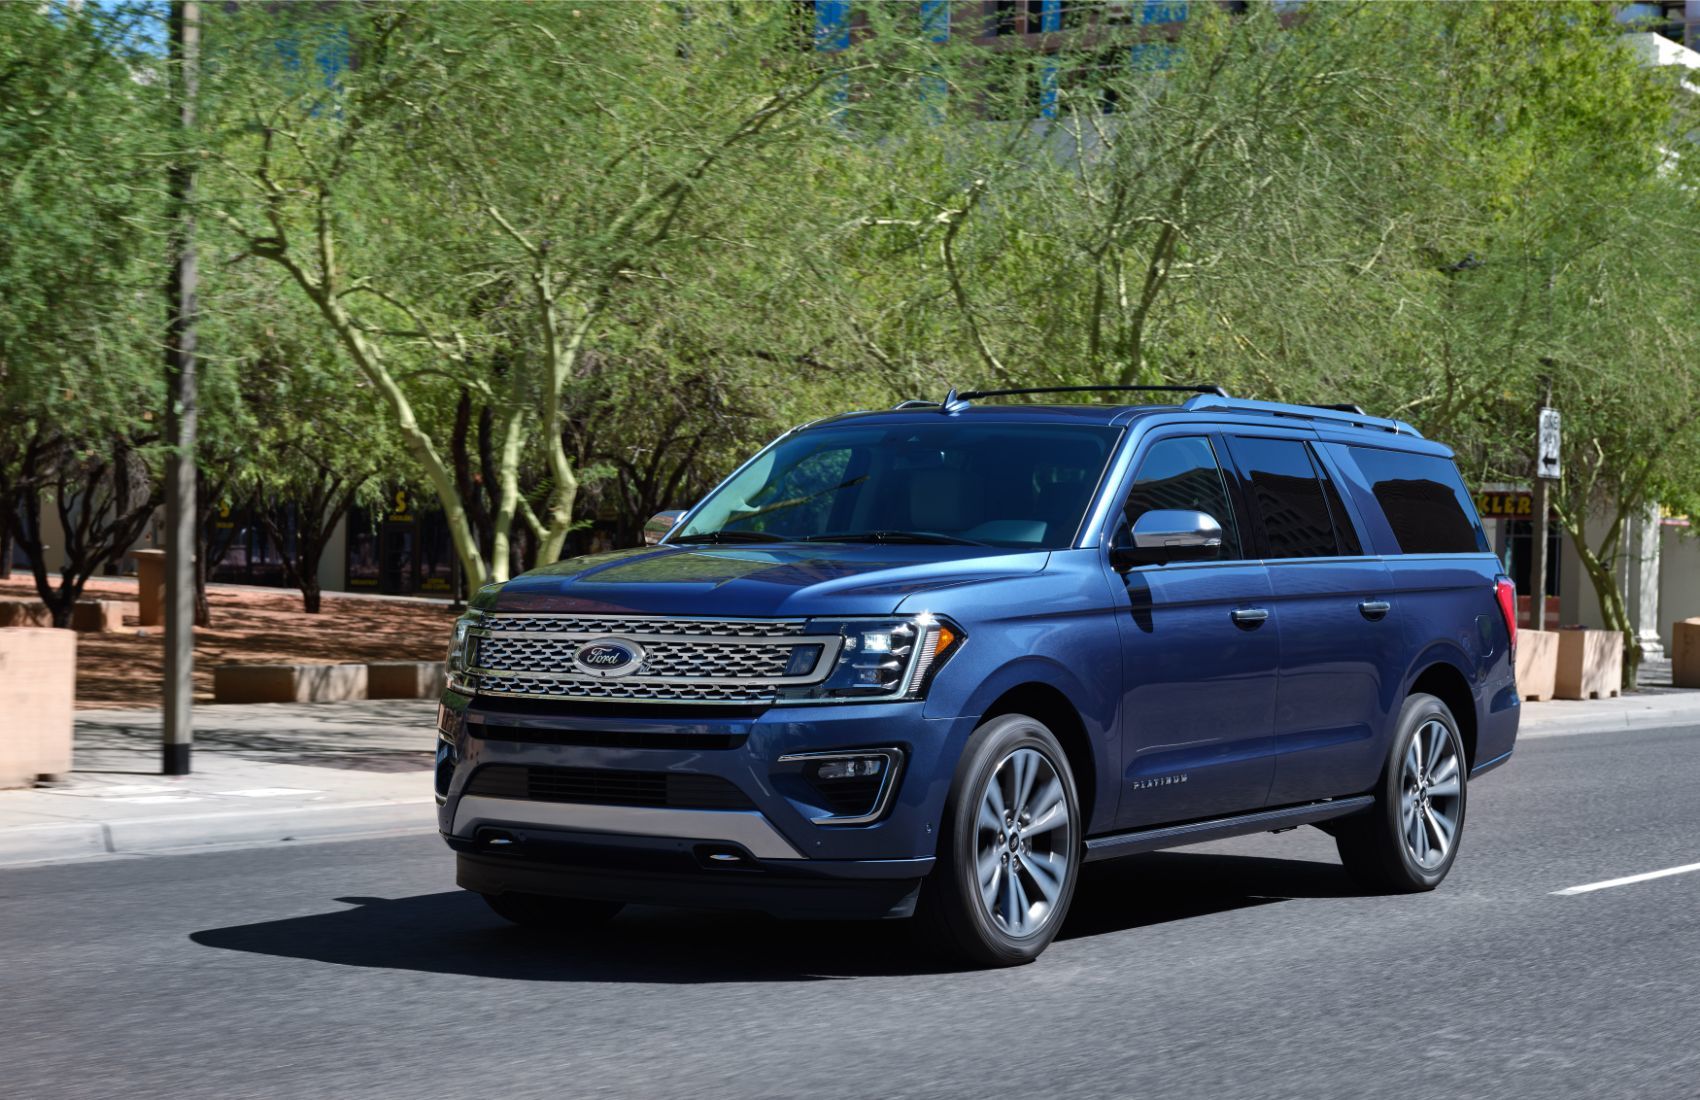 Ford Expedition: Here's What's New For 2020